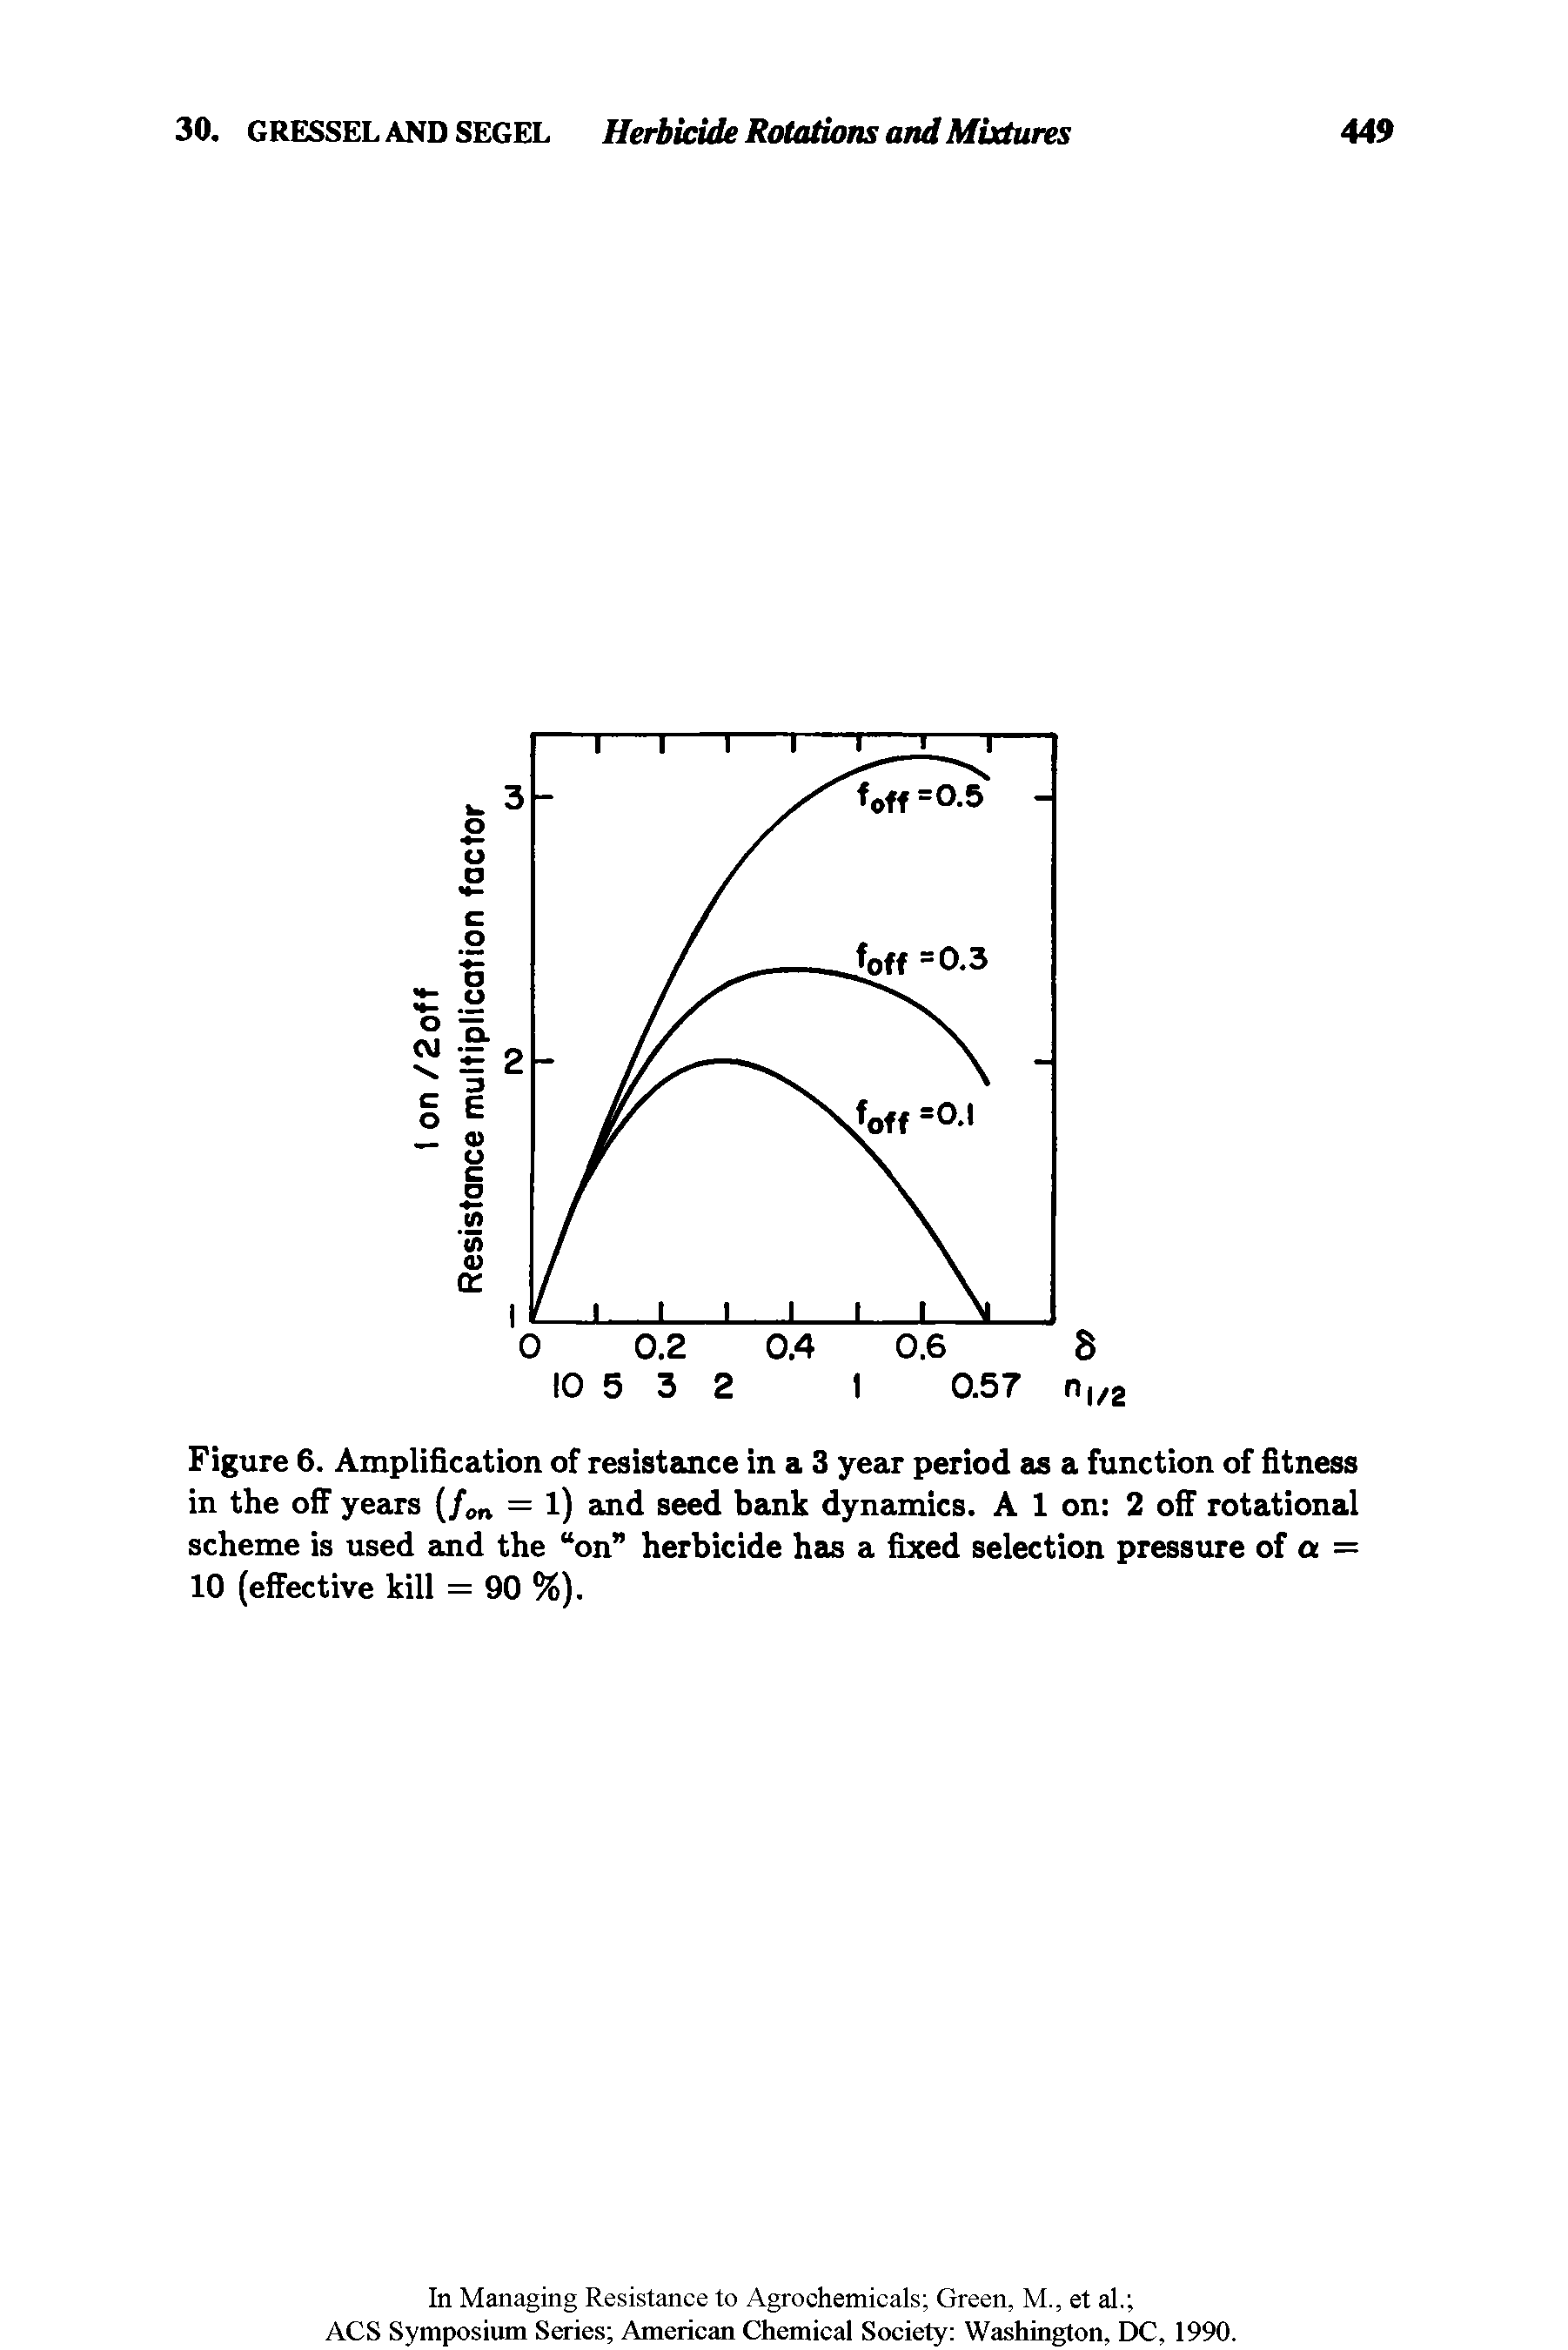 Figure 6. Amplification of resistance in a 3 year period as a function of fitness in the off years (fm = l) and seed bank dynamics. A 1 on 2 off rotational scheme is used and the on herbicide has a fixed selection pressure of a = 10 (effective kill = 90 %).